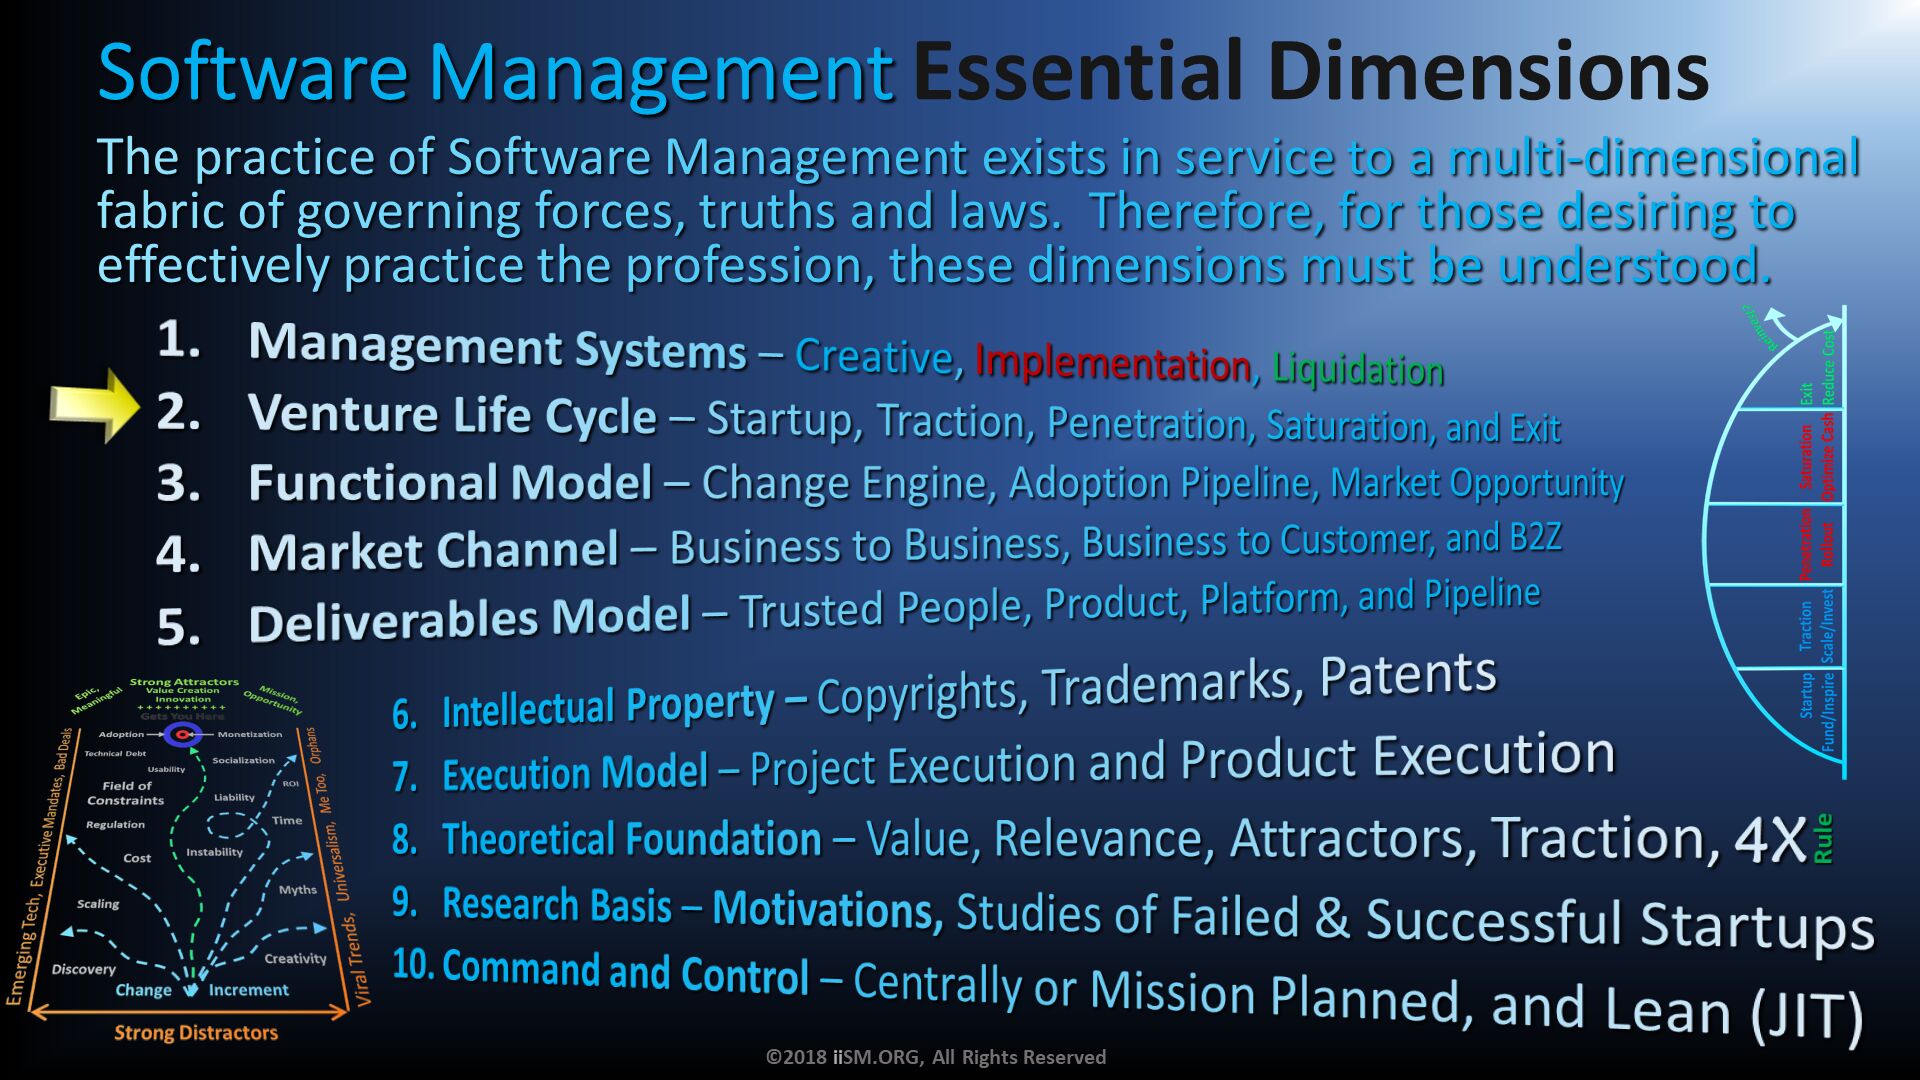 Software Management Essential Dimensions. Management Systems – Creative, Implementation, Liquidation
Venture Life Cycle – Startup, Traction, Penetration, Saturation, and Exit
Functional Model – Change Engine, Adoption Pipeline, Market Opportunity
Market Channel – Business to Business, Business to Customer, and B2Z
Deliverables Model – Trusted People, Product, Platform, and Pipeline . The practice of Software Management exists in service to a multi-dimensional fabric of governing forces, truths and laws.  Therefore, for those desiring to effectively practice the profession, these dimensions must be understood. . Intellectual Property – Copyrights, Trademarks, Patents 
Execution Model – Project Execution and Product Execution
Theoretical Foundation – Value, Relevance, Attractors, Traction, 
Research Basis – Motivations, Studies of Failed & Successful Startups
Command and Control – Centrally or Mission Planned, and Lean (JIT). ©2018 iiSM.ORG, All Rights Reserved. 